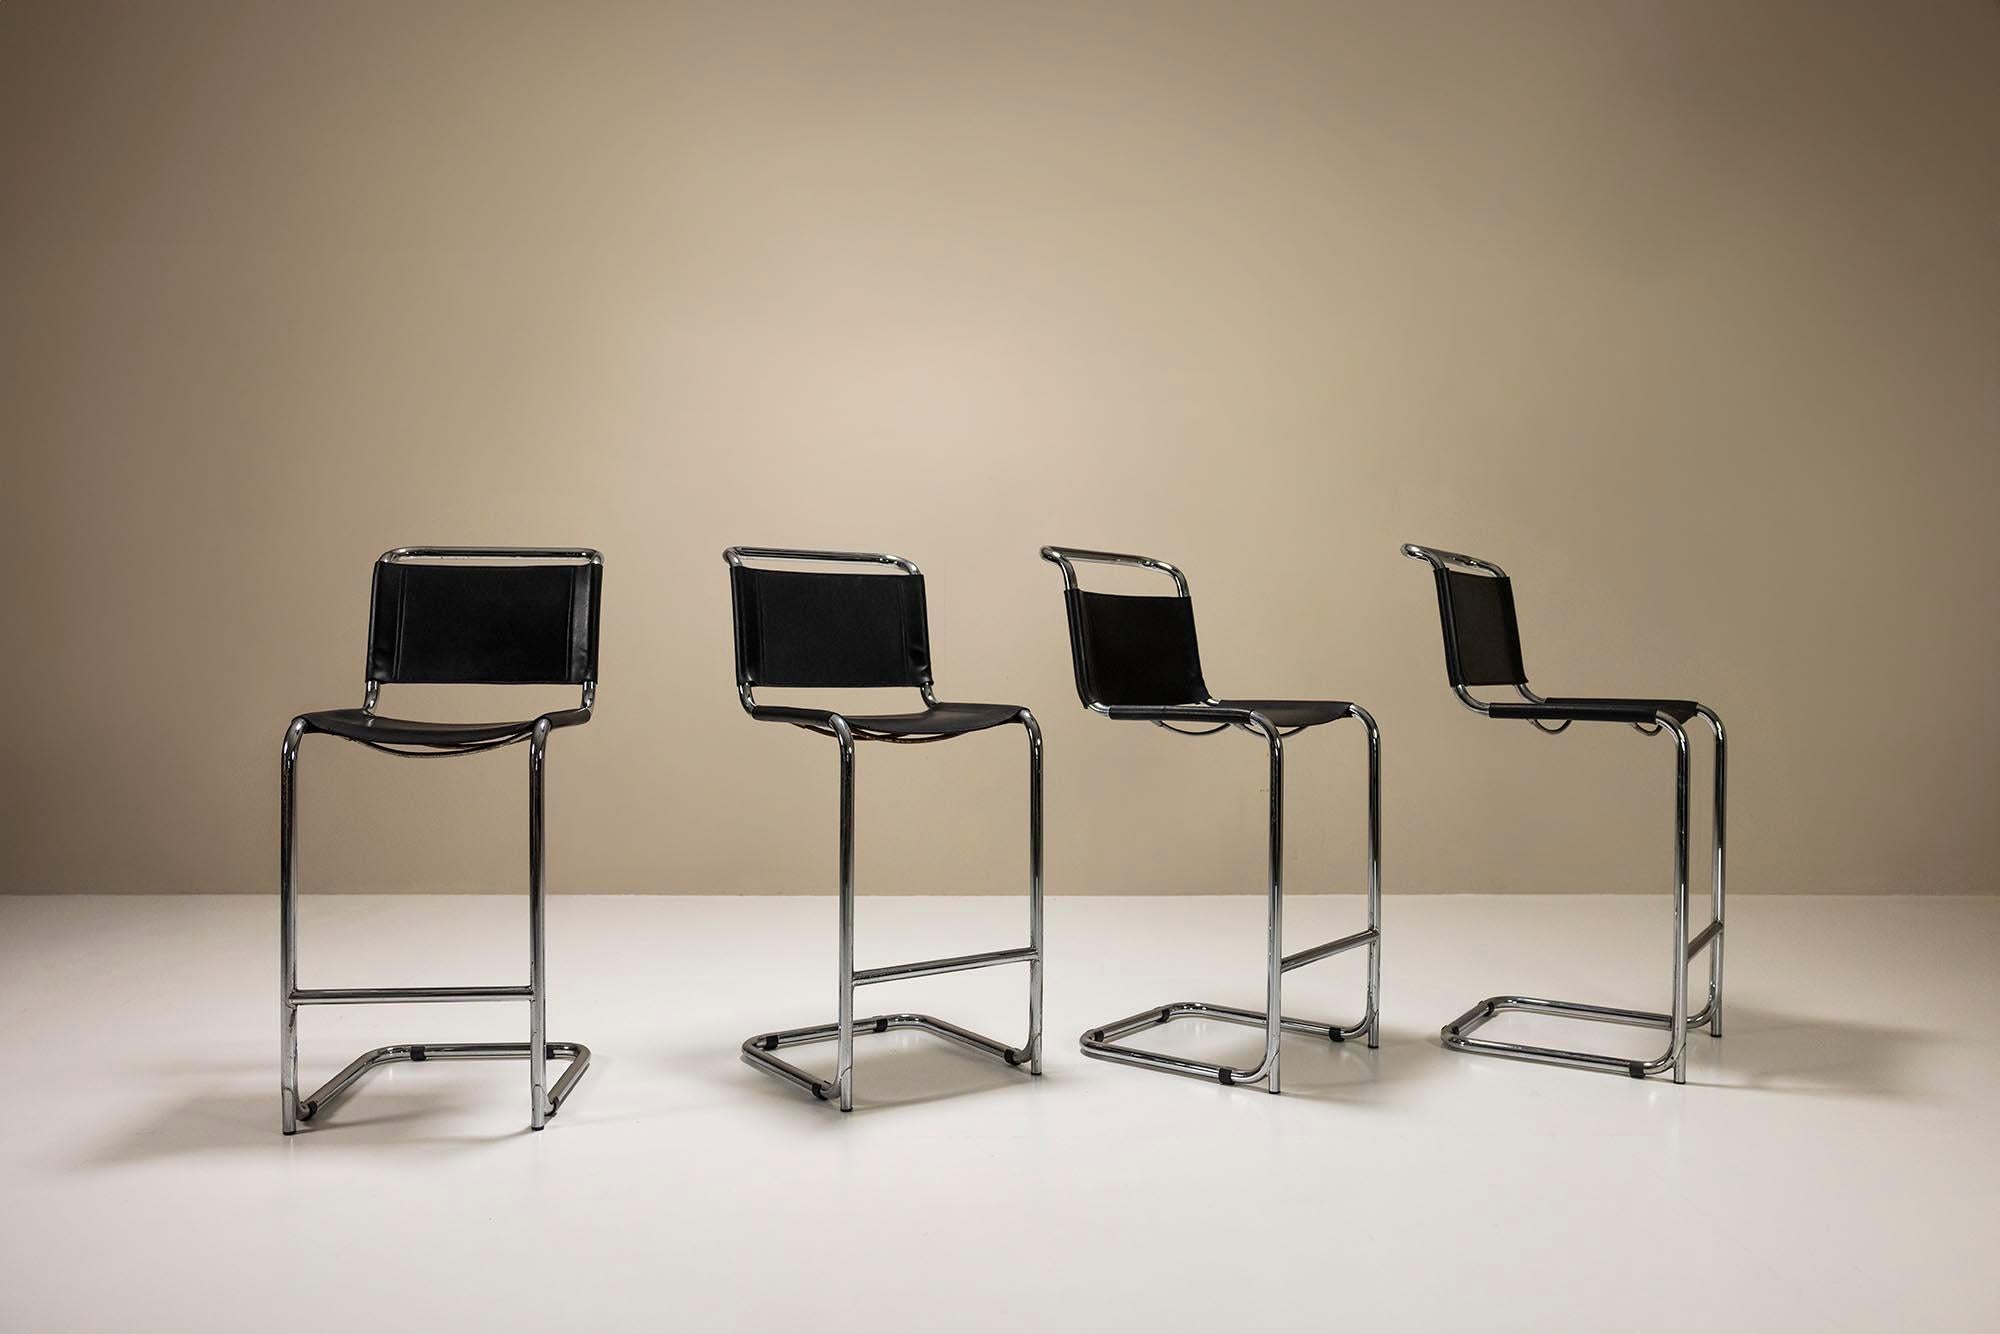 Set of four bar stools in aluminum by Marcel Breuer for Gordon International.Slender, elegant but above all timeless are the designs of architect and furniture designer Marcel Breuer, who has obviously left an indelible impression in the world of